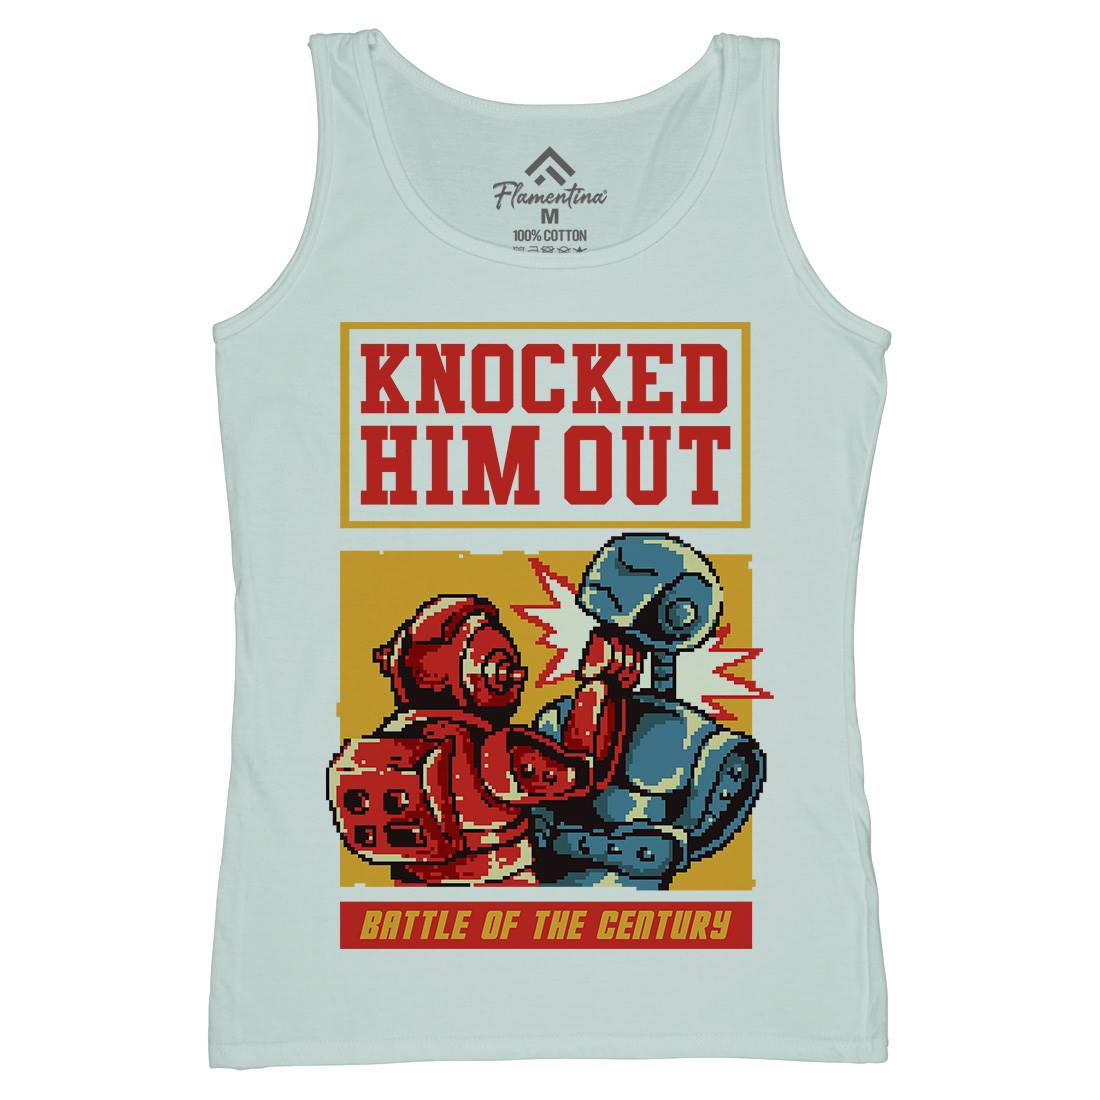 Knocked Him Out Womens Organic Tank Top Vest Space B923